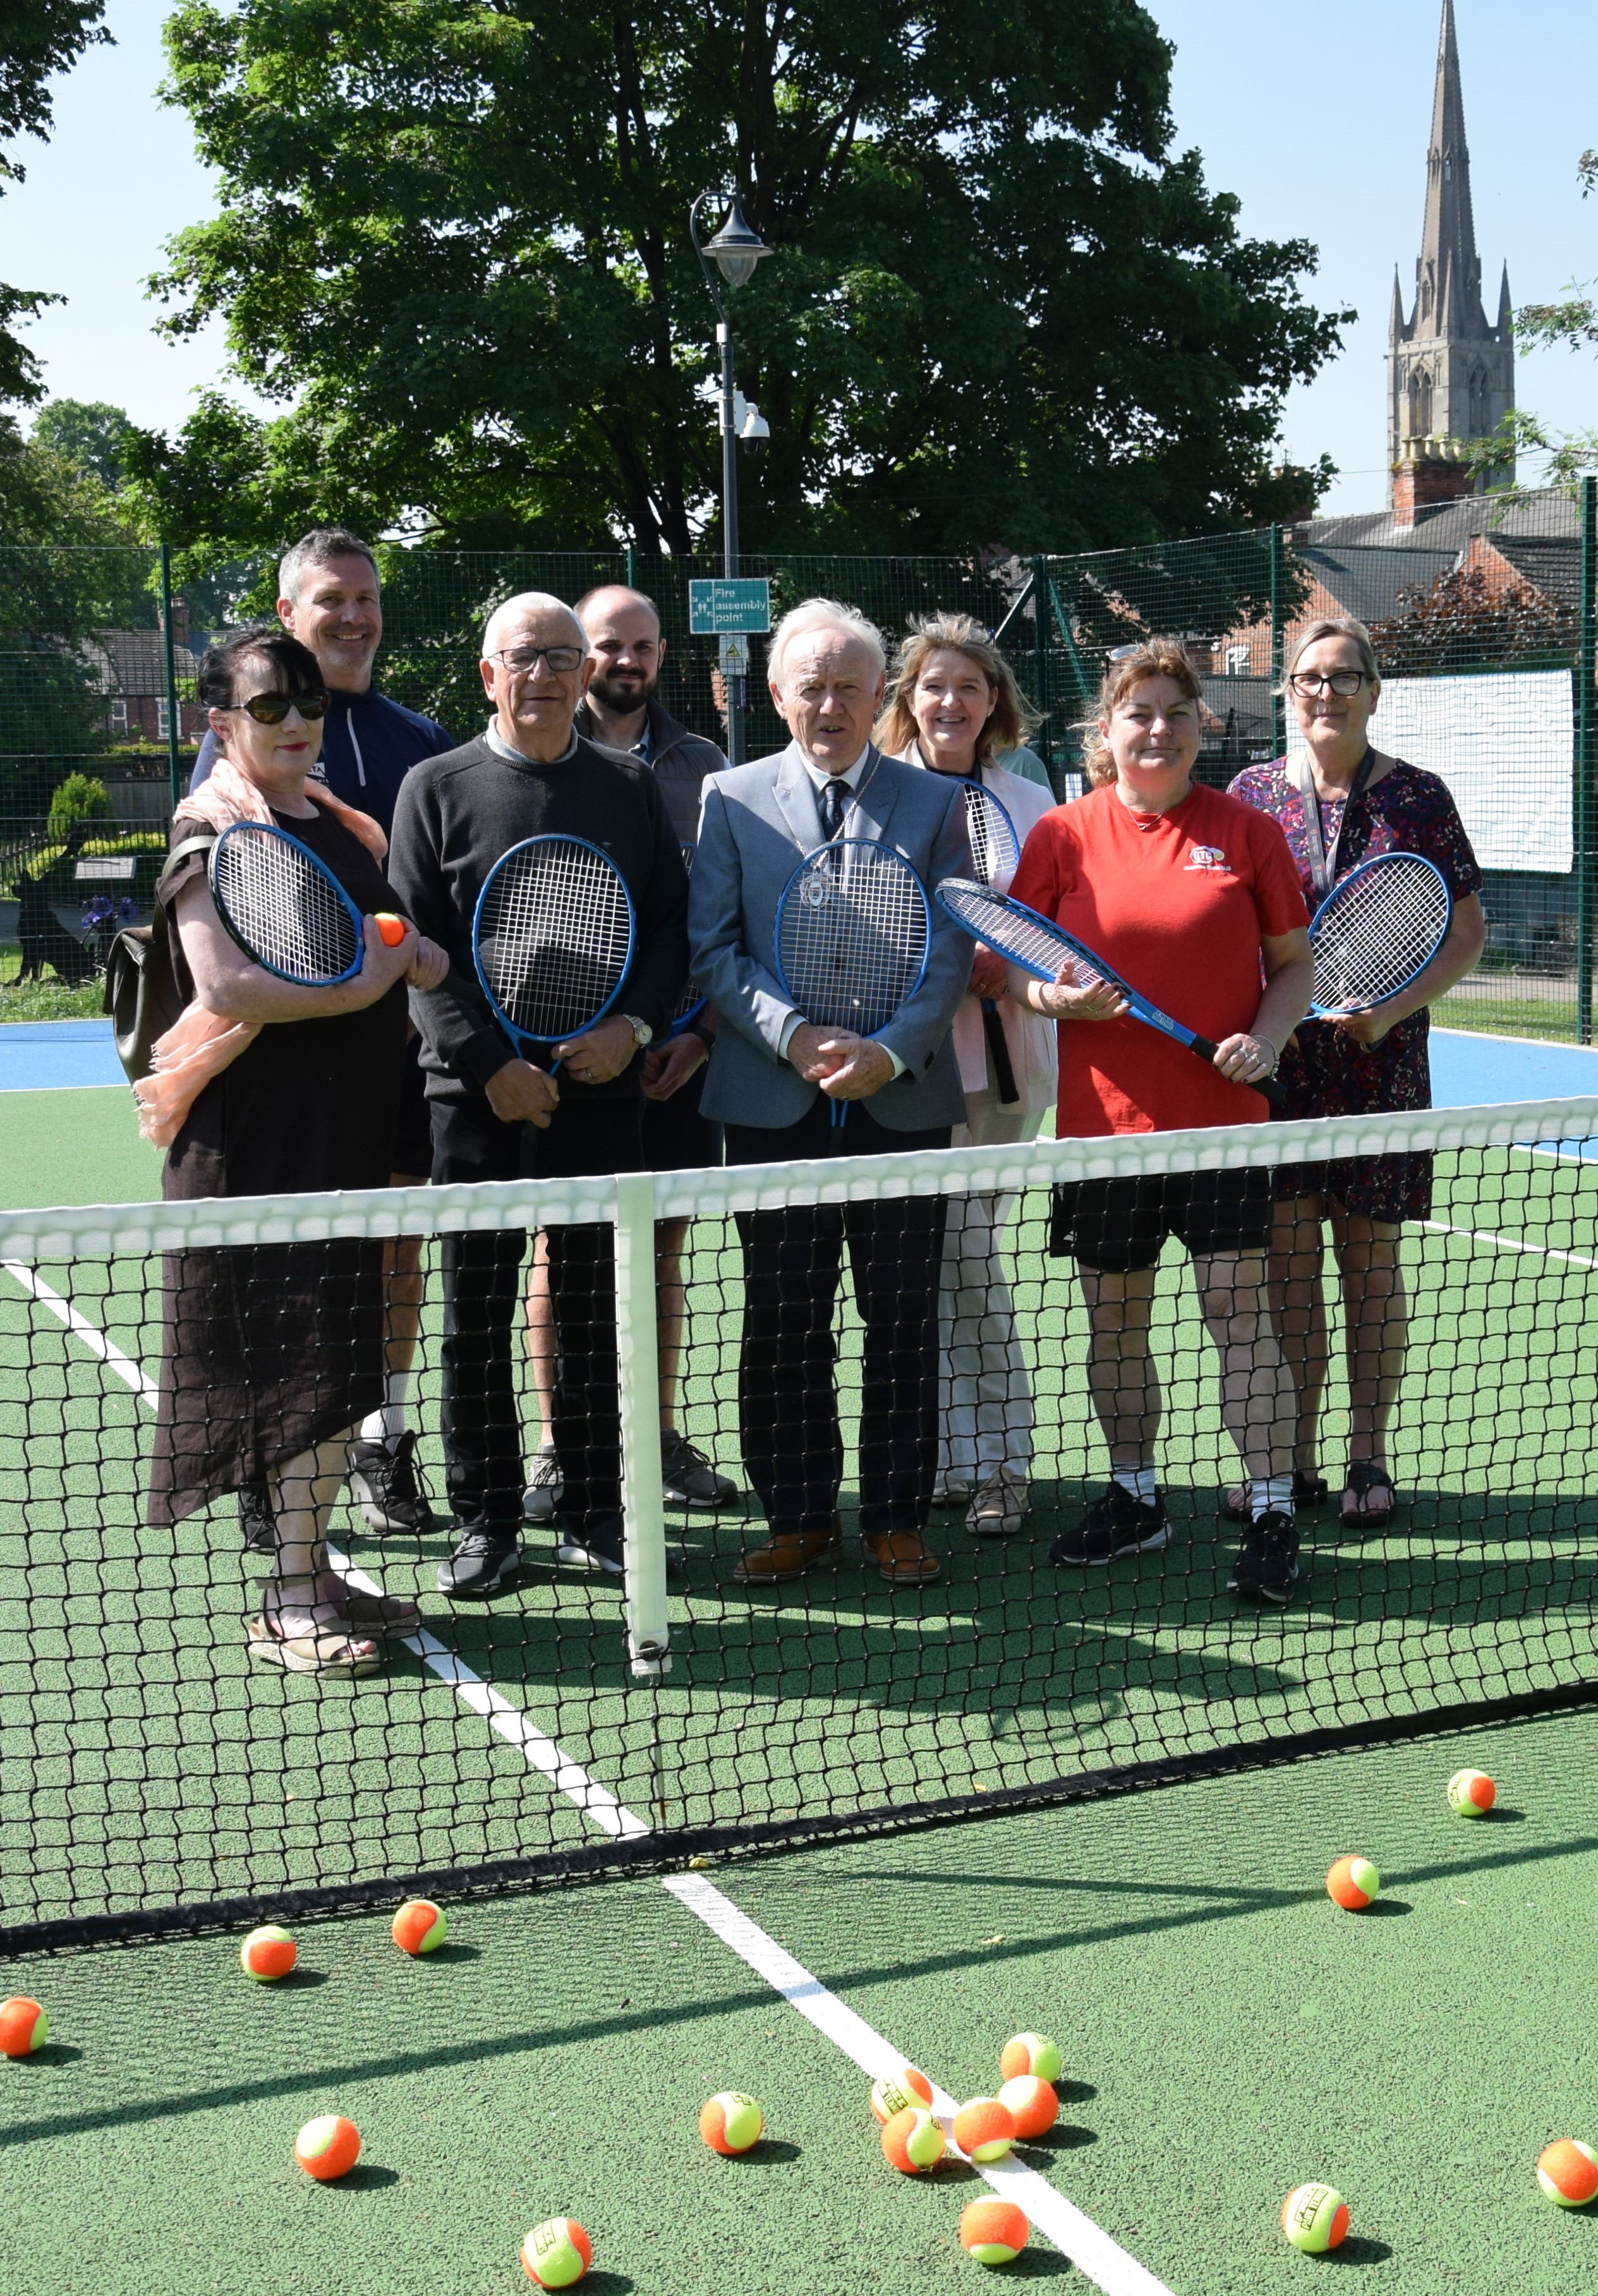 Refurbished courts are a hit with tennis fans